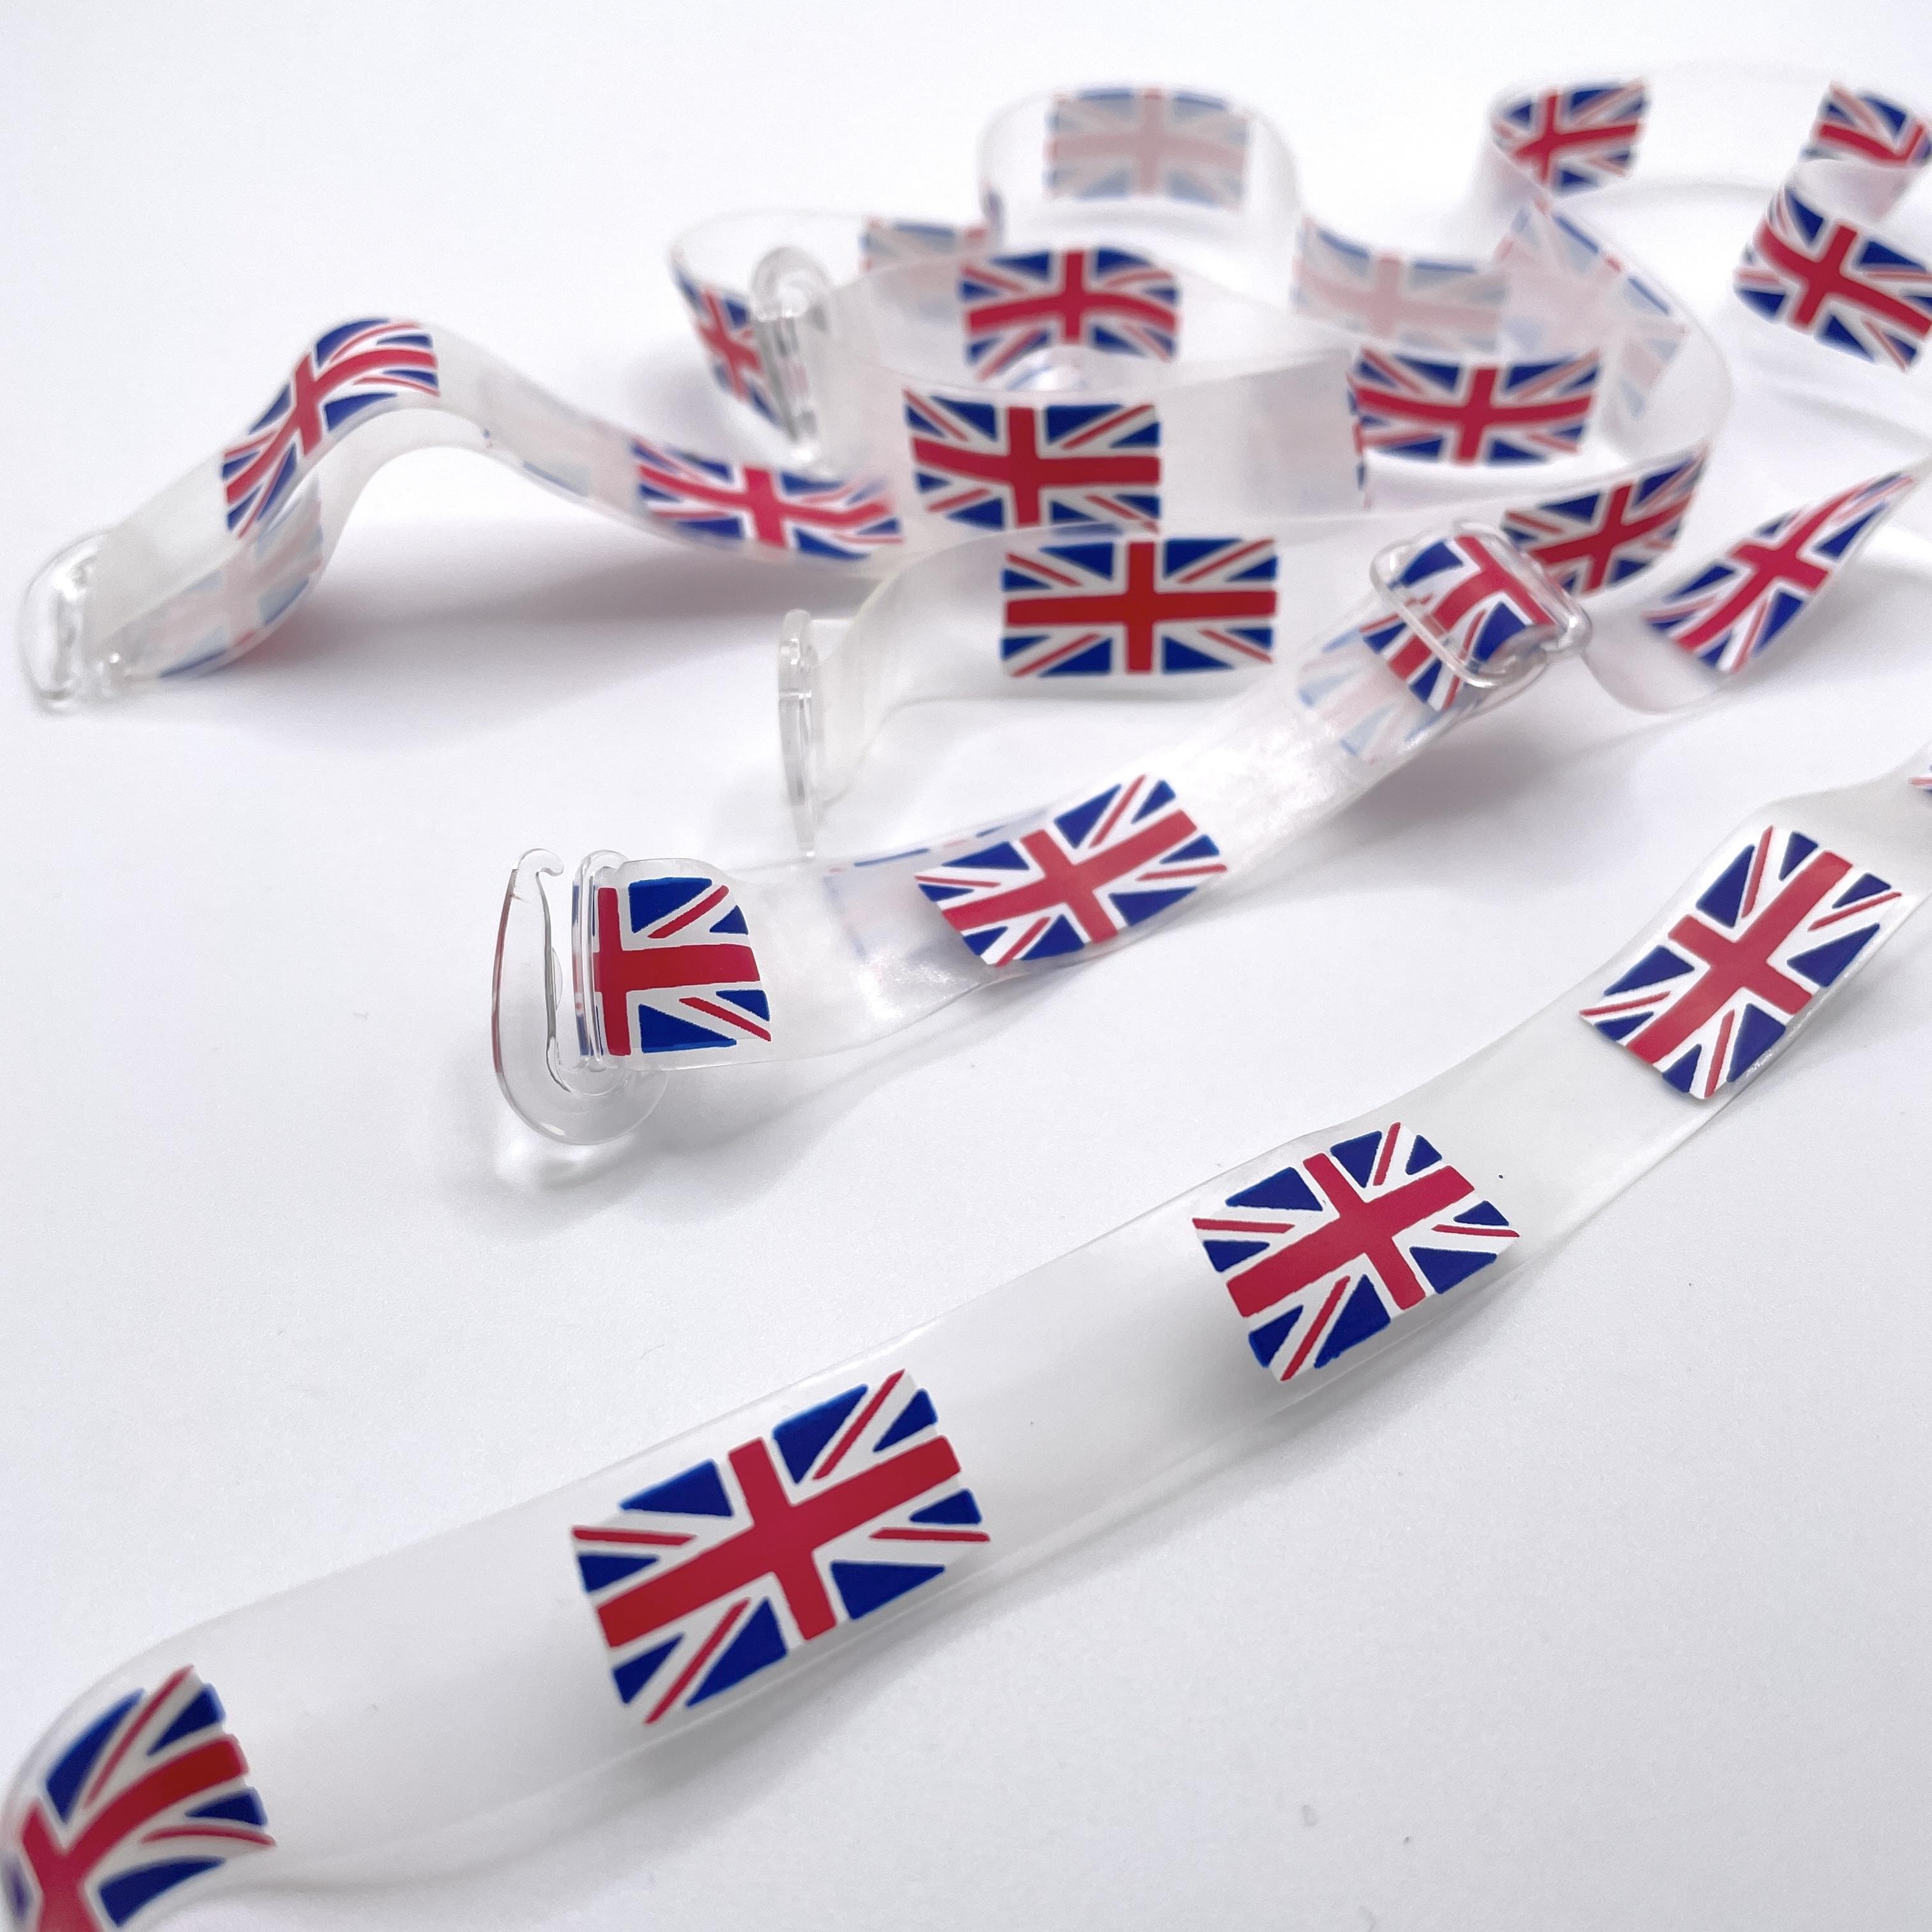 Bra Straps - Hook on - Replacement (48cm) - Clear Plastic with Union Jack  print, Clear plastic Fittings - 12mm - UK/ENGLAND - Clear/Red/White/Blue,  per pair